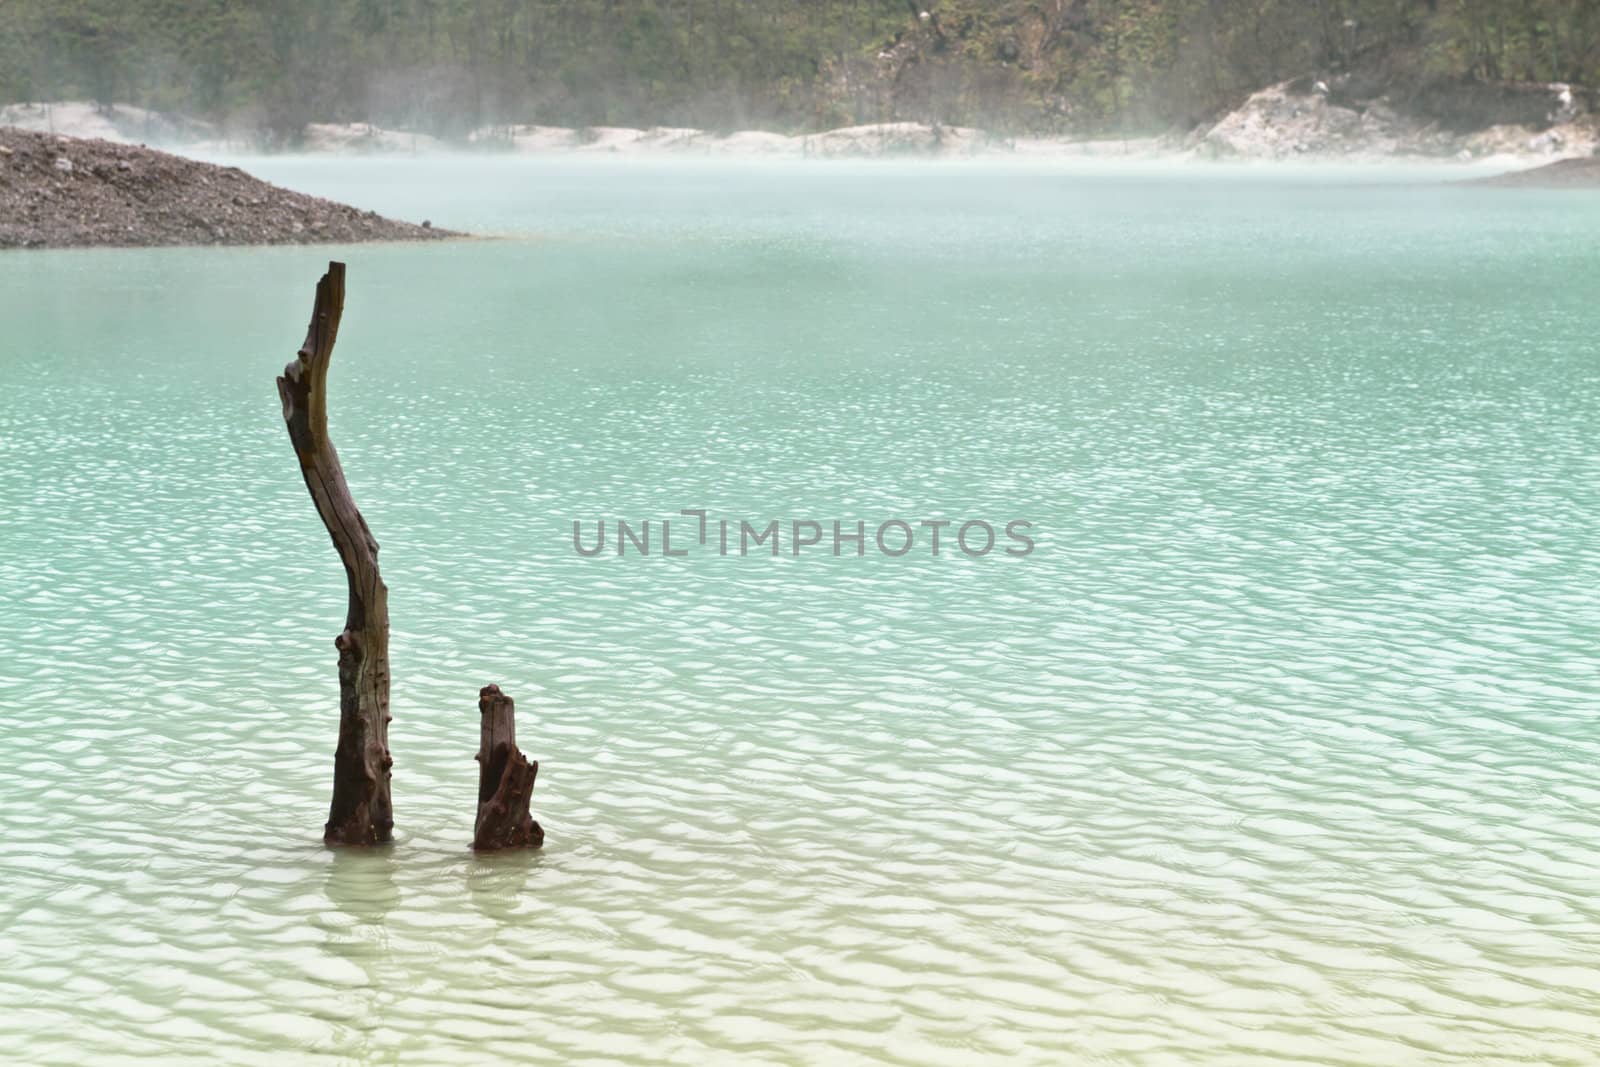 the remmnat of dead tree in the sulphuric water of volcanic crater lake of Kawah Putih, Bandung Indonesia